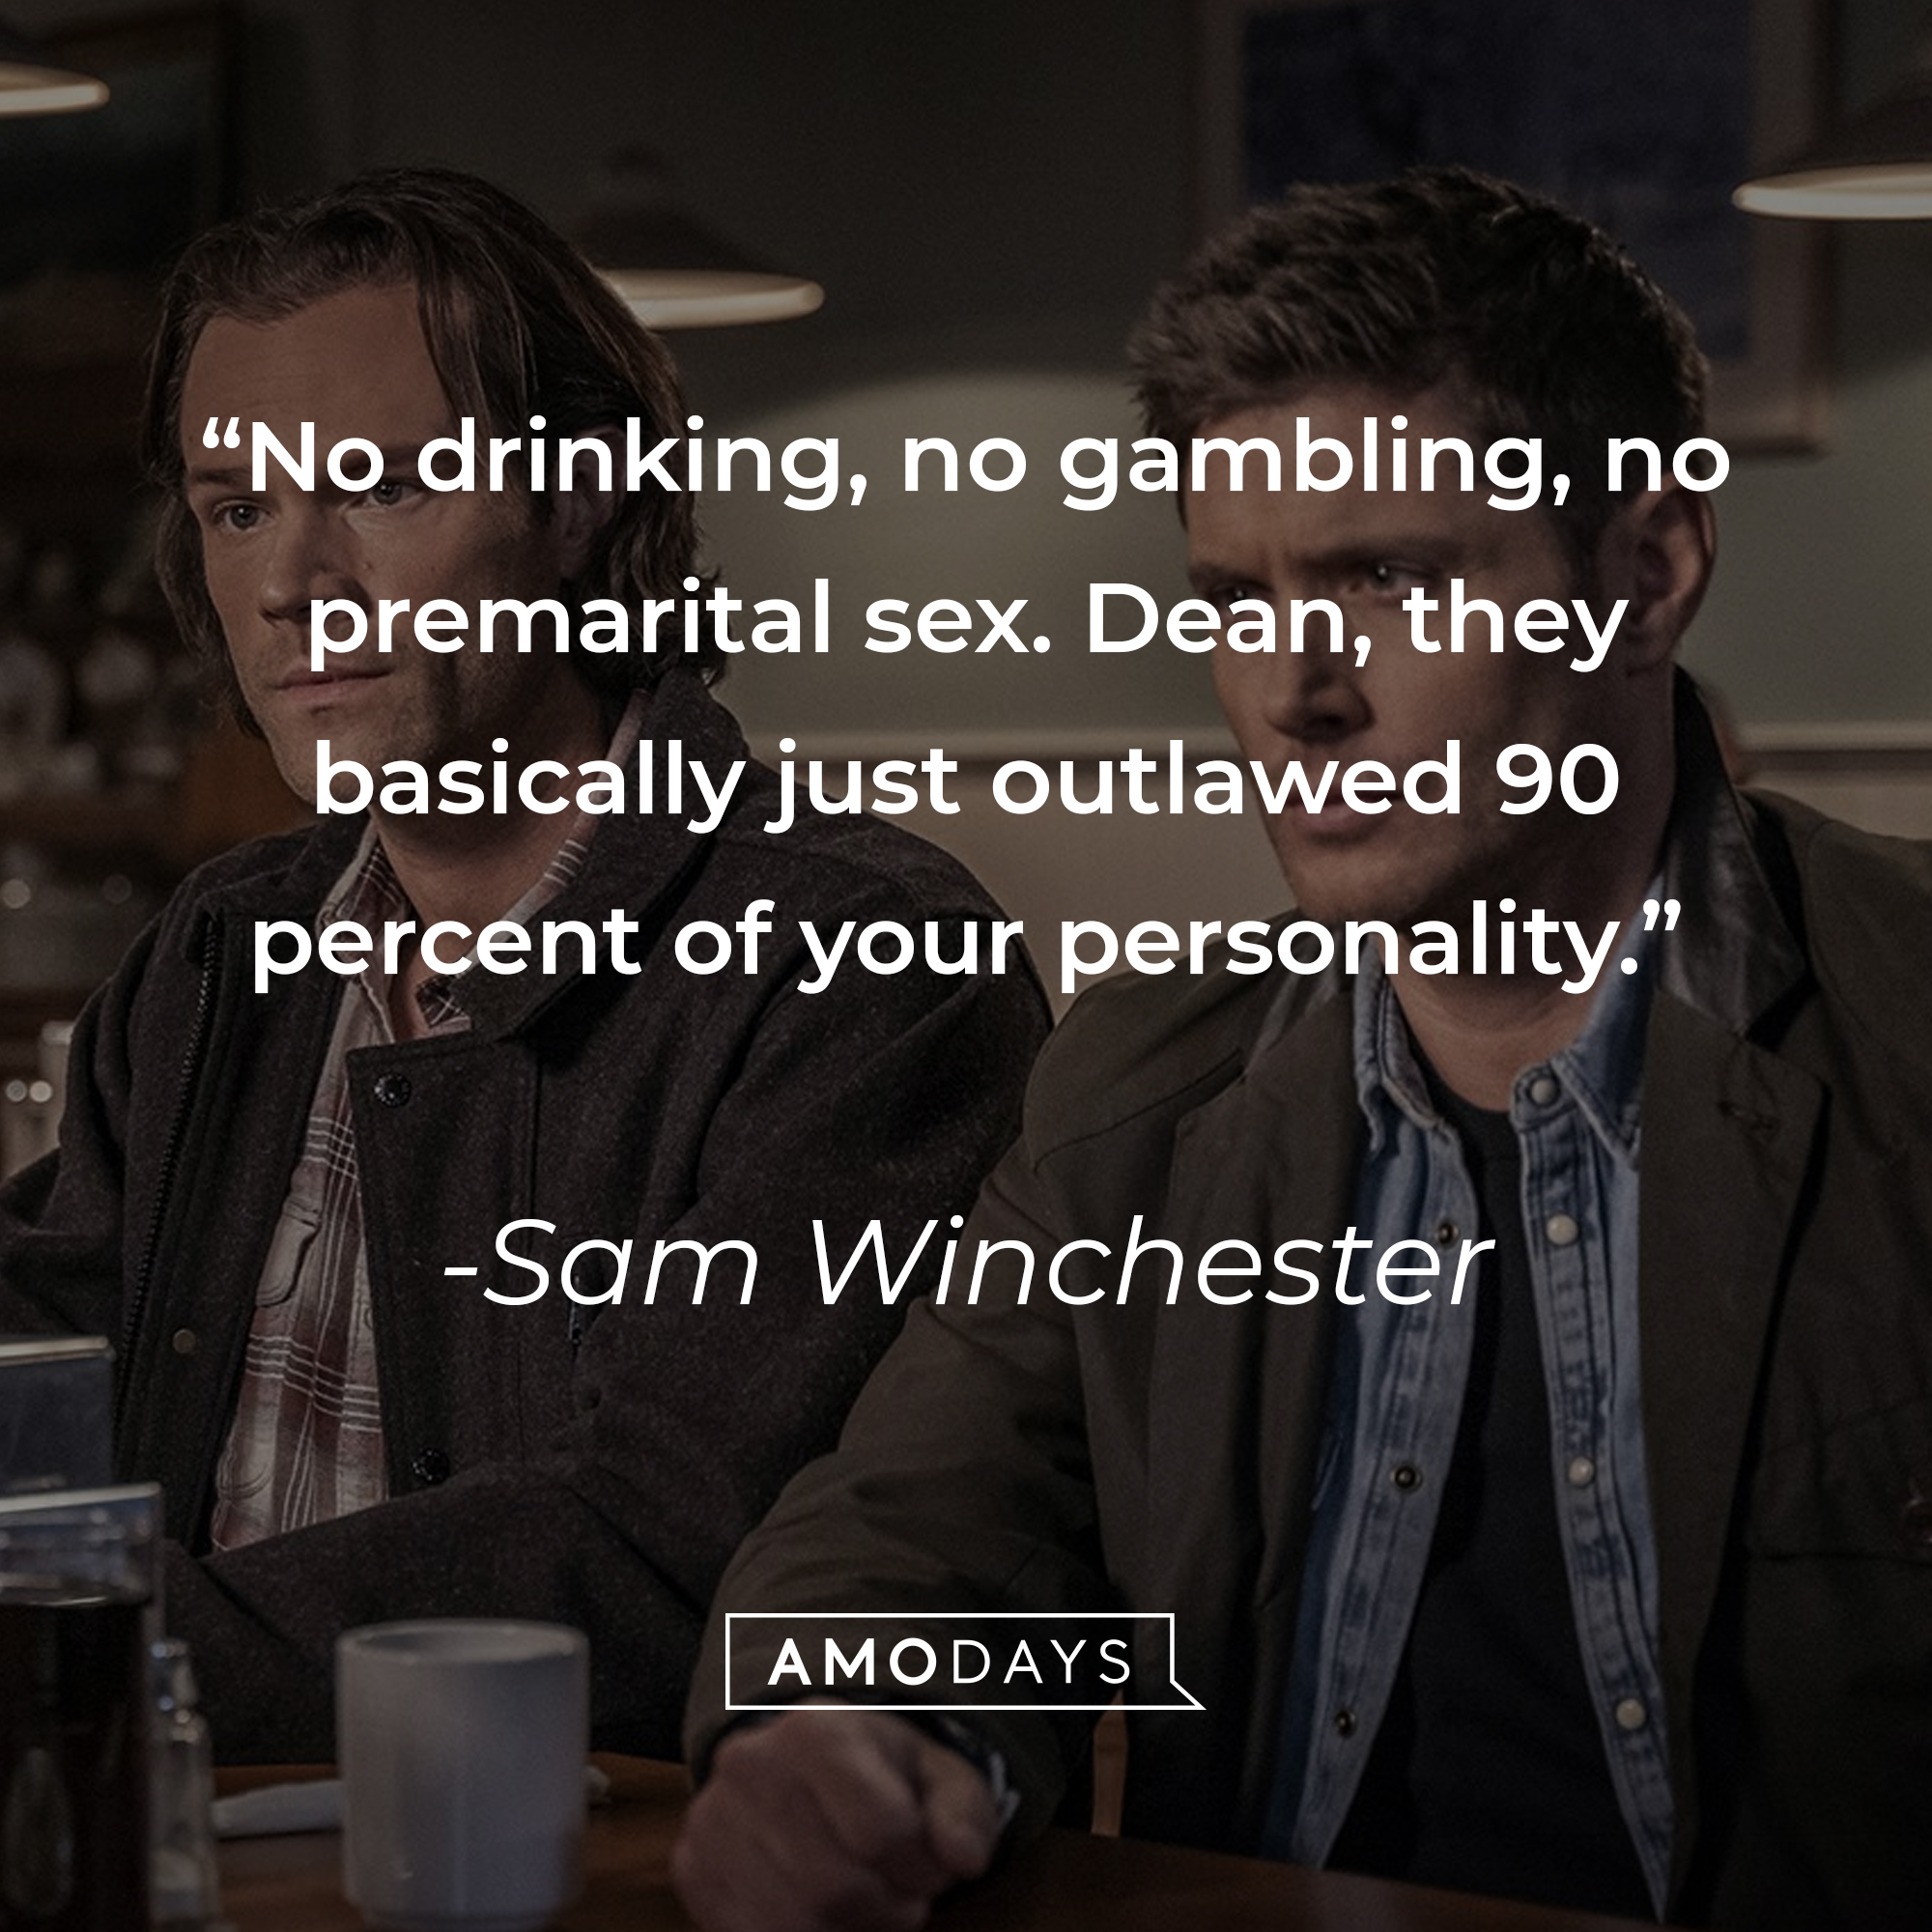 Sam Winchester's quote: "No drinking, no gambling, no premarital sex. Dean, they basically just outlawed 90 percent of your personality." | Source: Facebook.com/Supernatural